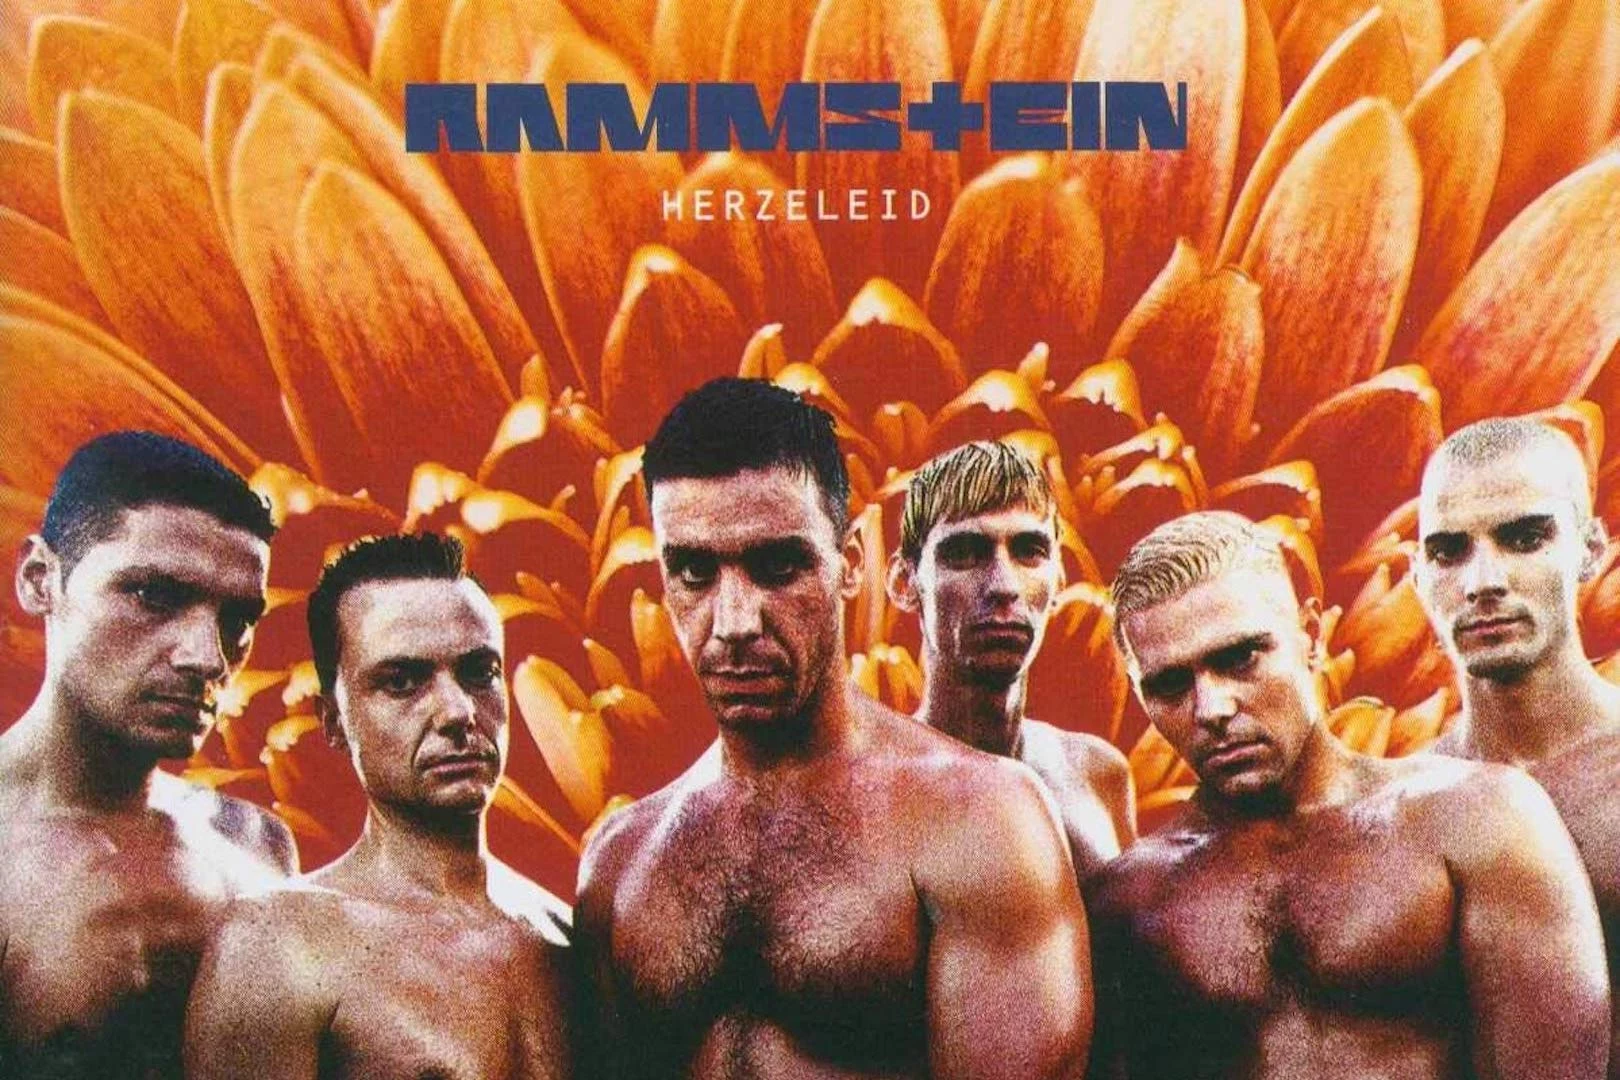 The Real Story of Rammstein's Debut Album